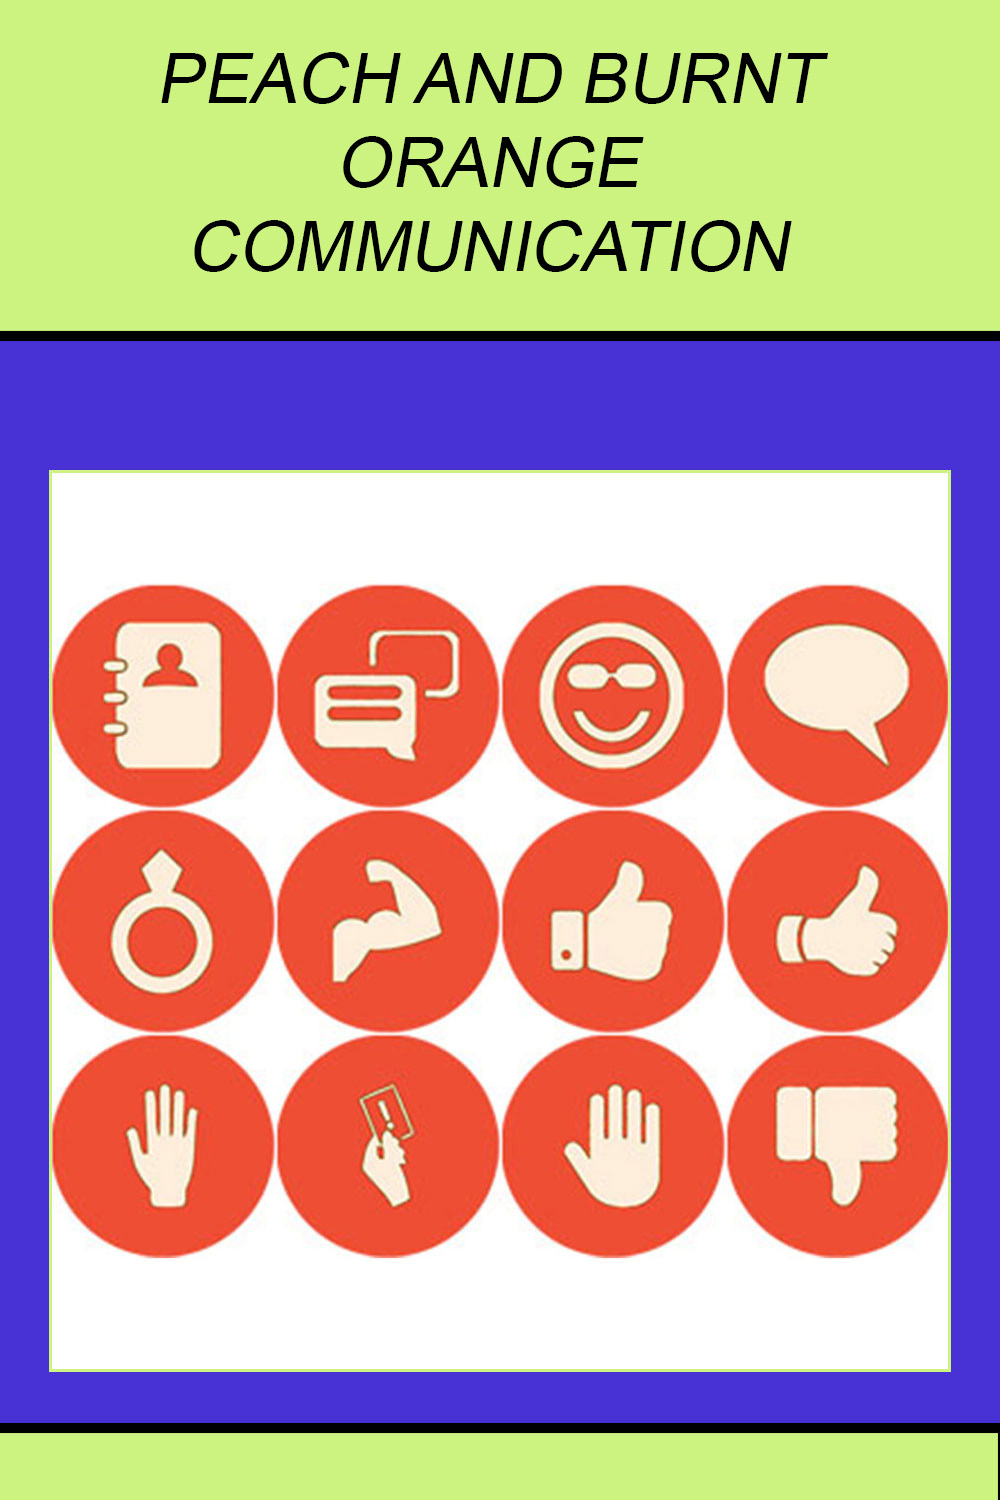 PEACH AND BURNT ORANGE COMMUNICATION ROUND ICONS pinterest preview image.